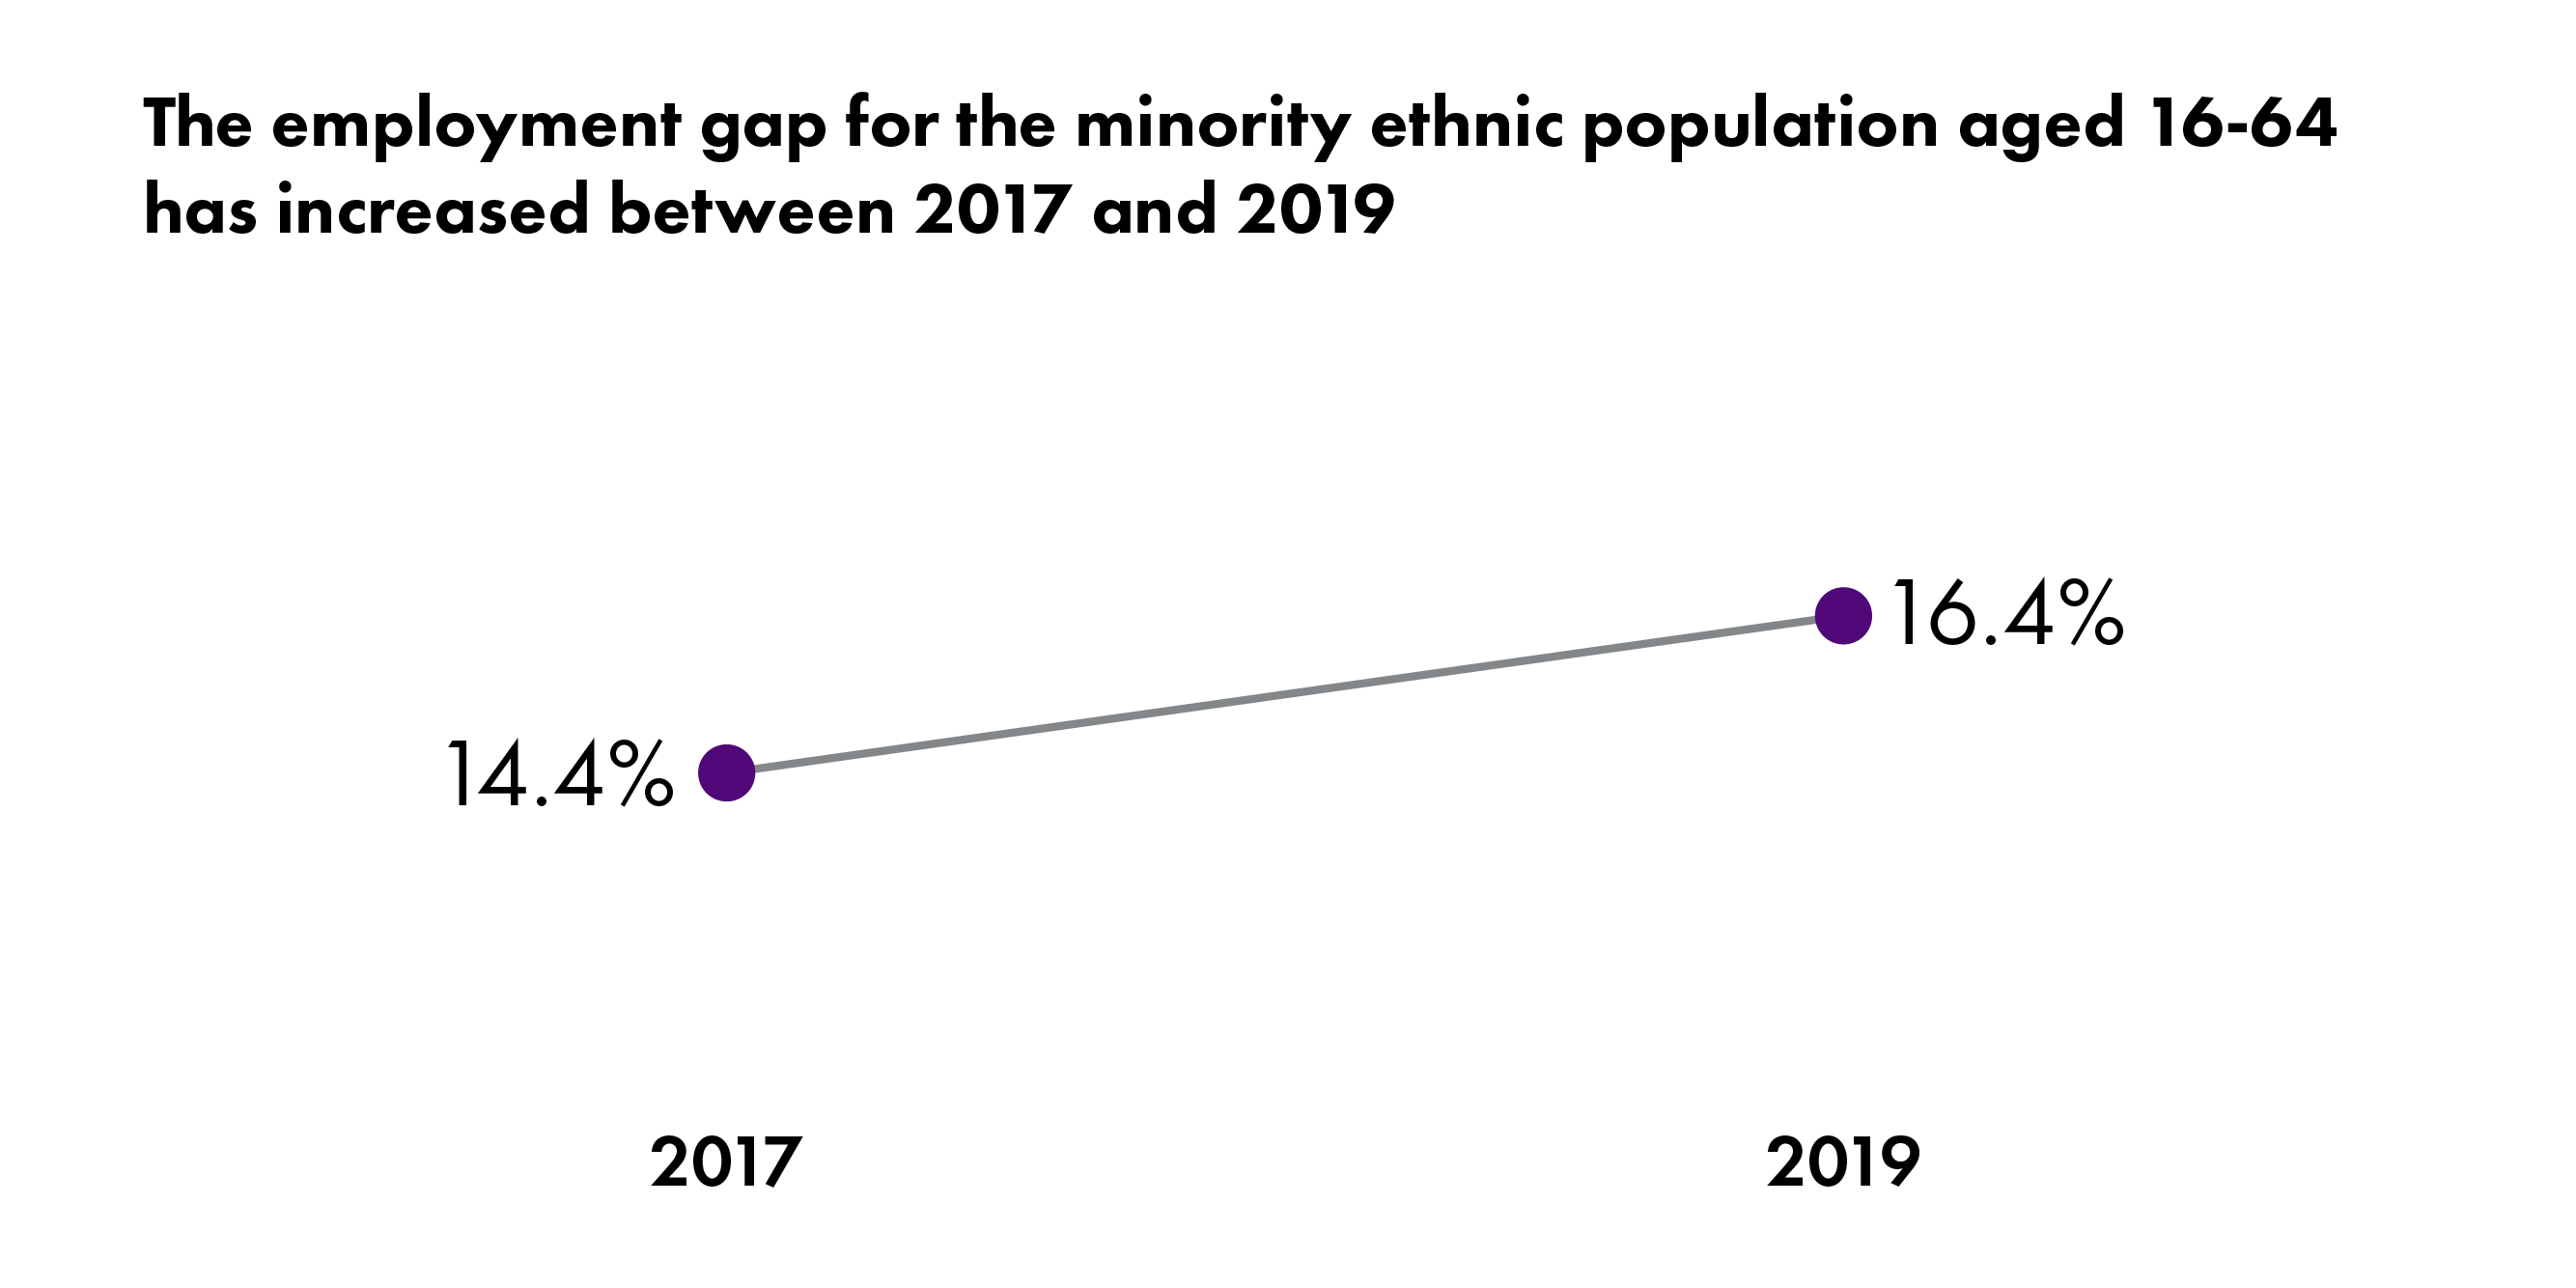 A chart showing that progress in tackling the ethnic employment gap has worsened - increasing from 14.4% to 16.4%